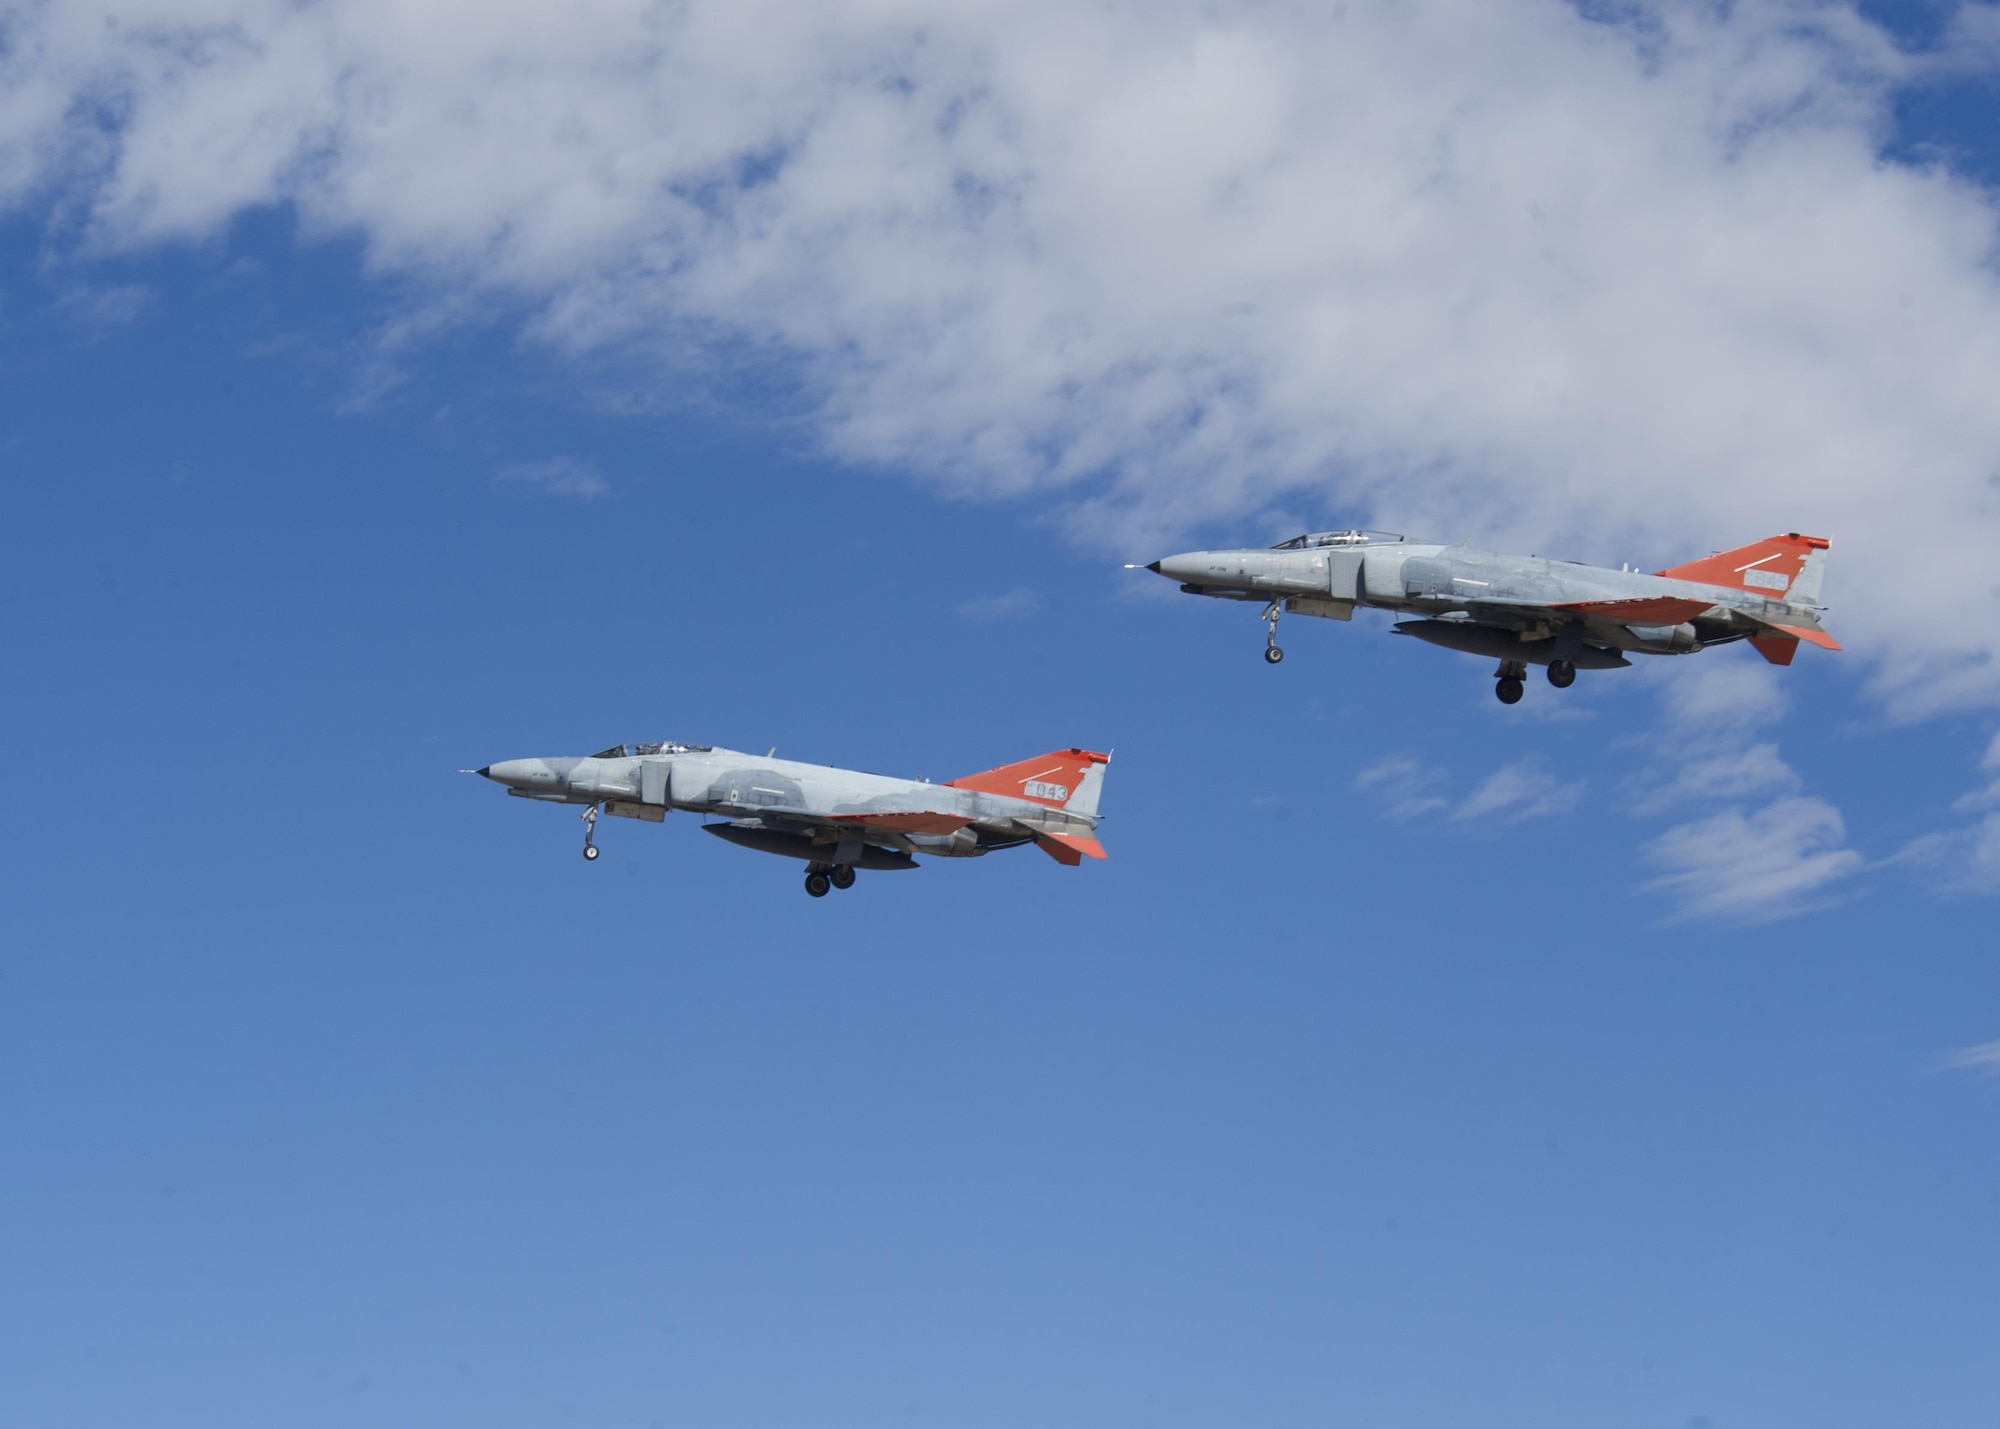 Two QF-4 Phantom IIs fly in formation over Holloman Air Force Base, N.M. on Sept. 13, 2016, in front of 160 spectators participating in Holloman’s annual Phantom Society Tour. The tour enabled aircraft enthusiasts, including veterans and non-veterans with aviation backgrounds, to learn more about Holloman AFB’s aircraft and mission. The tour included an F-16 Fighting Falcon static display and briefing, travel to Holloman’s High Speed Test Track, the opportunity to view QF-4 Phantom IIs and F-16s in flight, and a visit to the base’s heritage park to view static displays of various aircraft historically stationed at Holloman AFB. (U.S. Air Force photo by Master Sgt. Matthew McGovern)